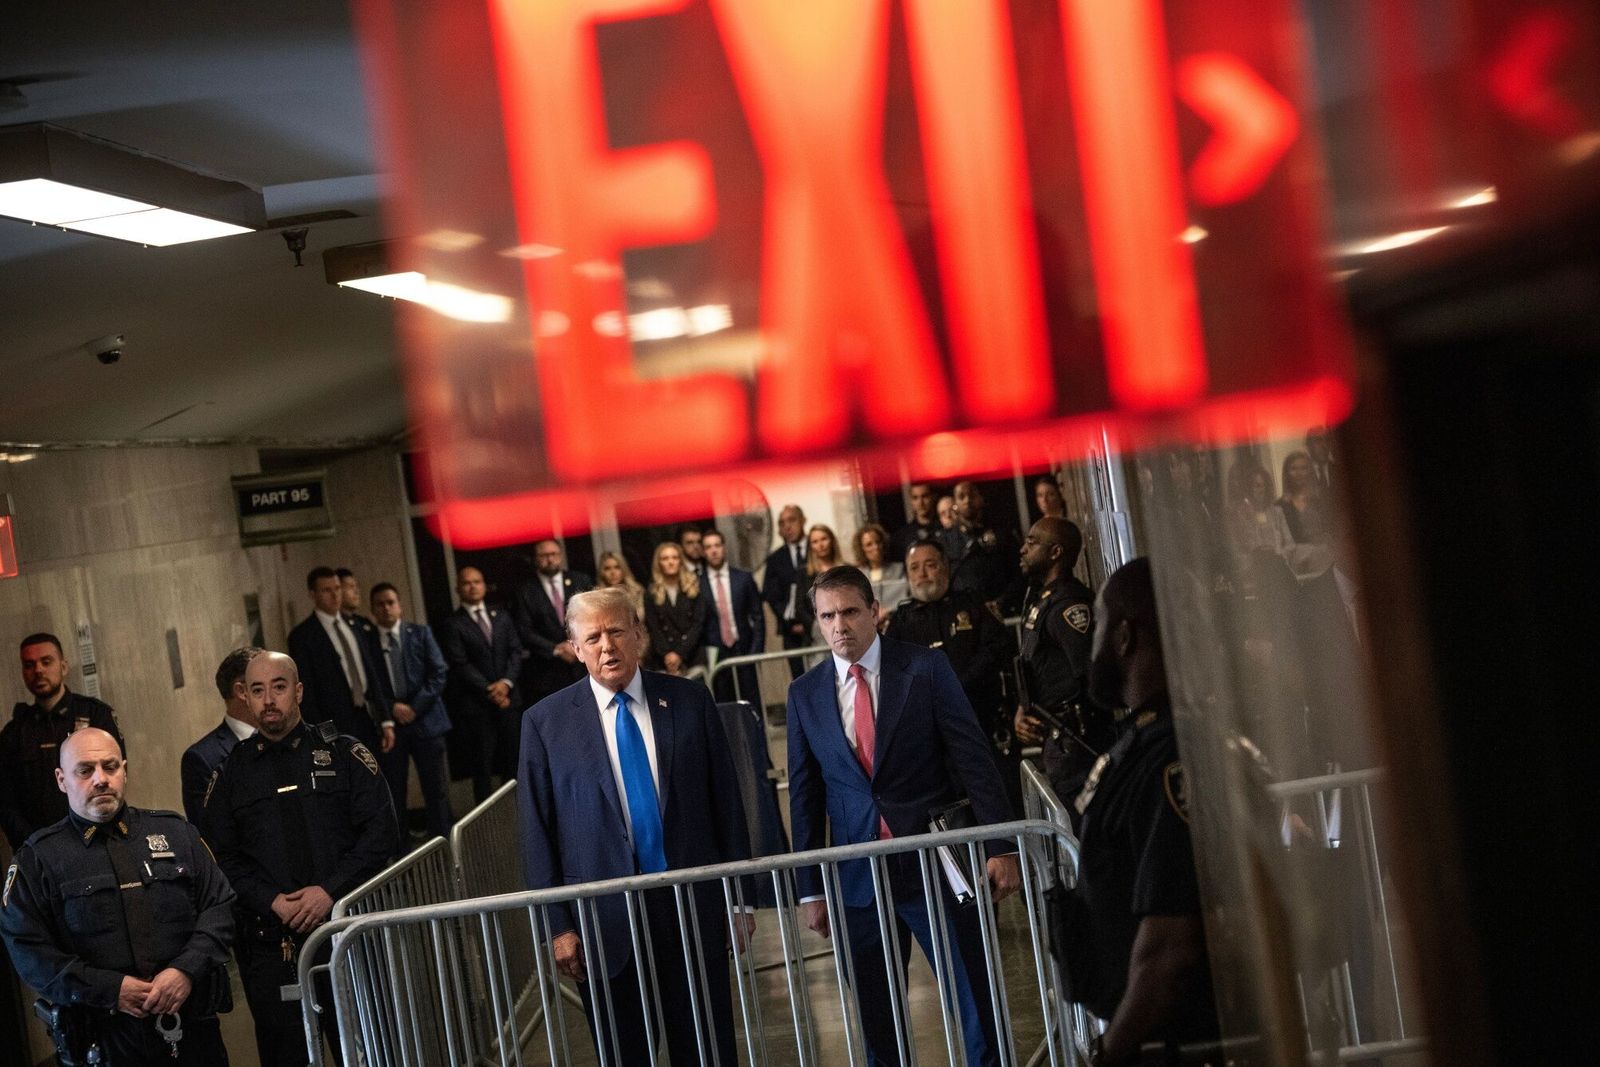 Former US President Donald Trump, center left, and Todd Blanche, attorney for former US President Donald Trump, center right, at Manhattan criminal court in New York, US, on Monday, April 22, 2024. Trump faces 34 felony counts of falsifying business records as part of an alleged scheme to silence claims of extramarital sexual encounters during his 2016 presidential campaign. Photographer: Victor J. Blue/The Washington Post/Bloomberg